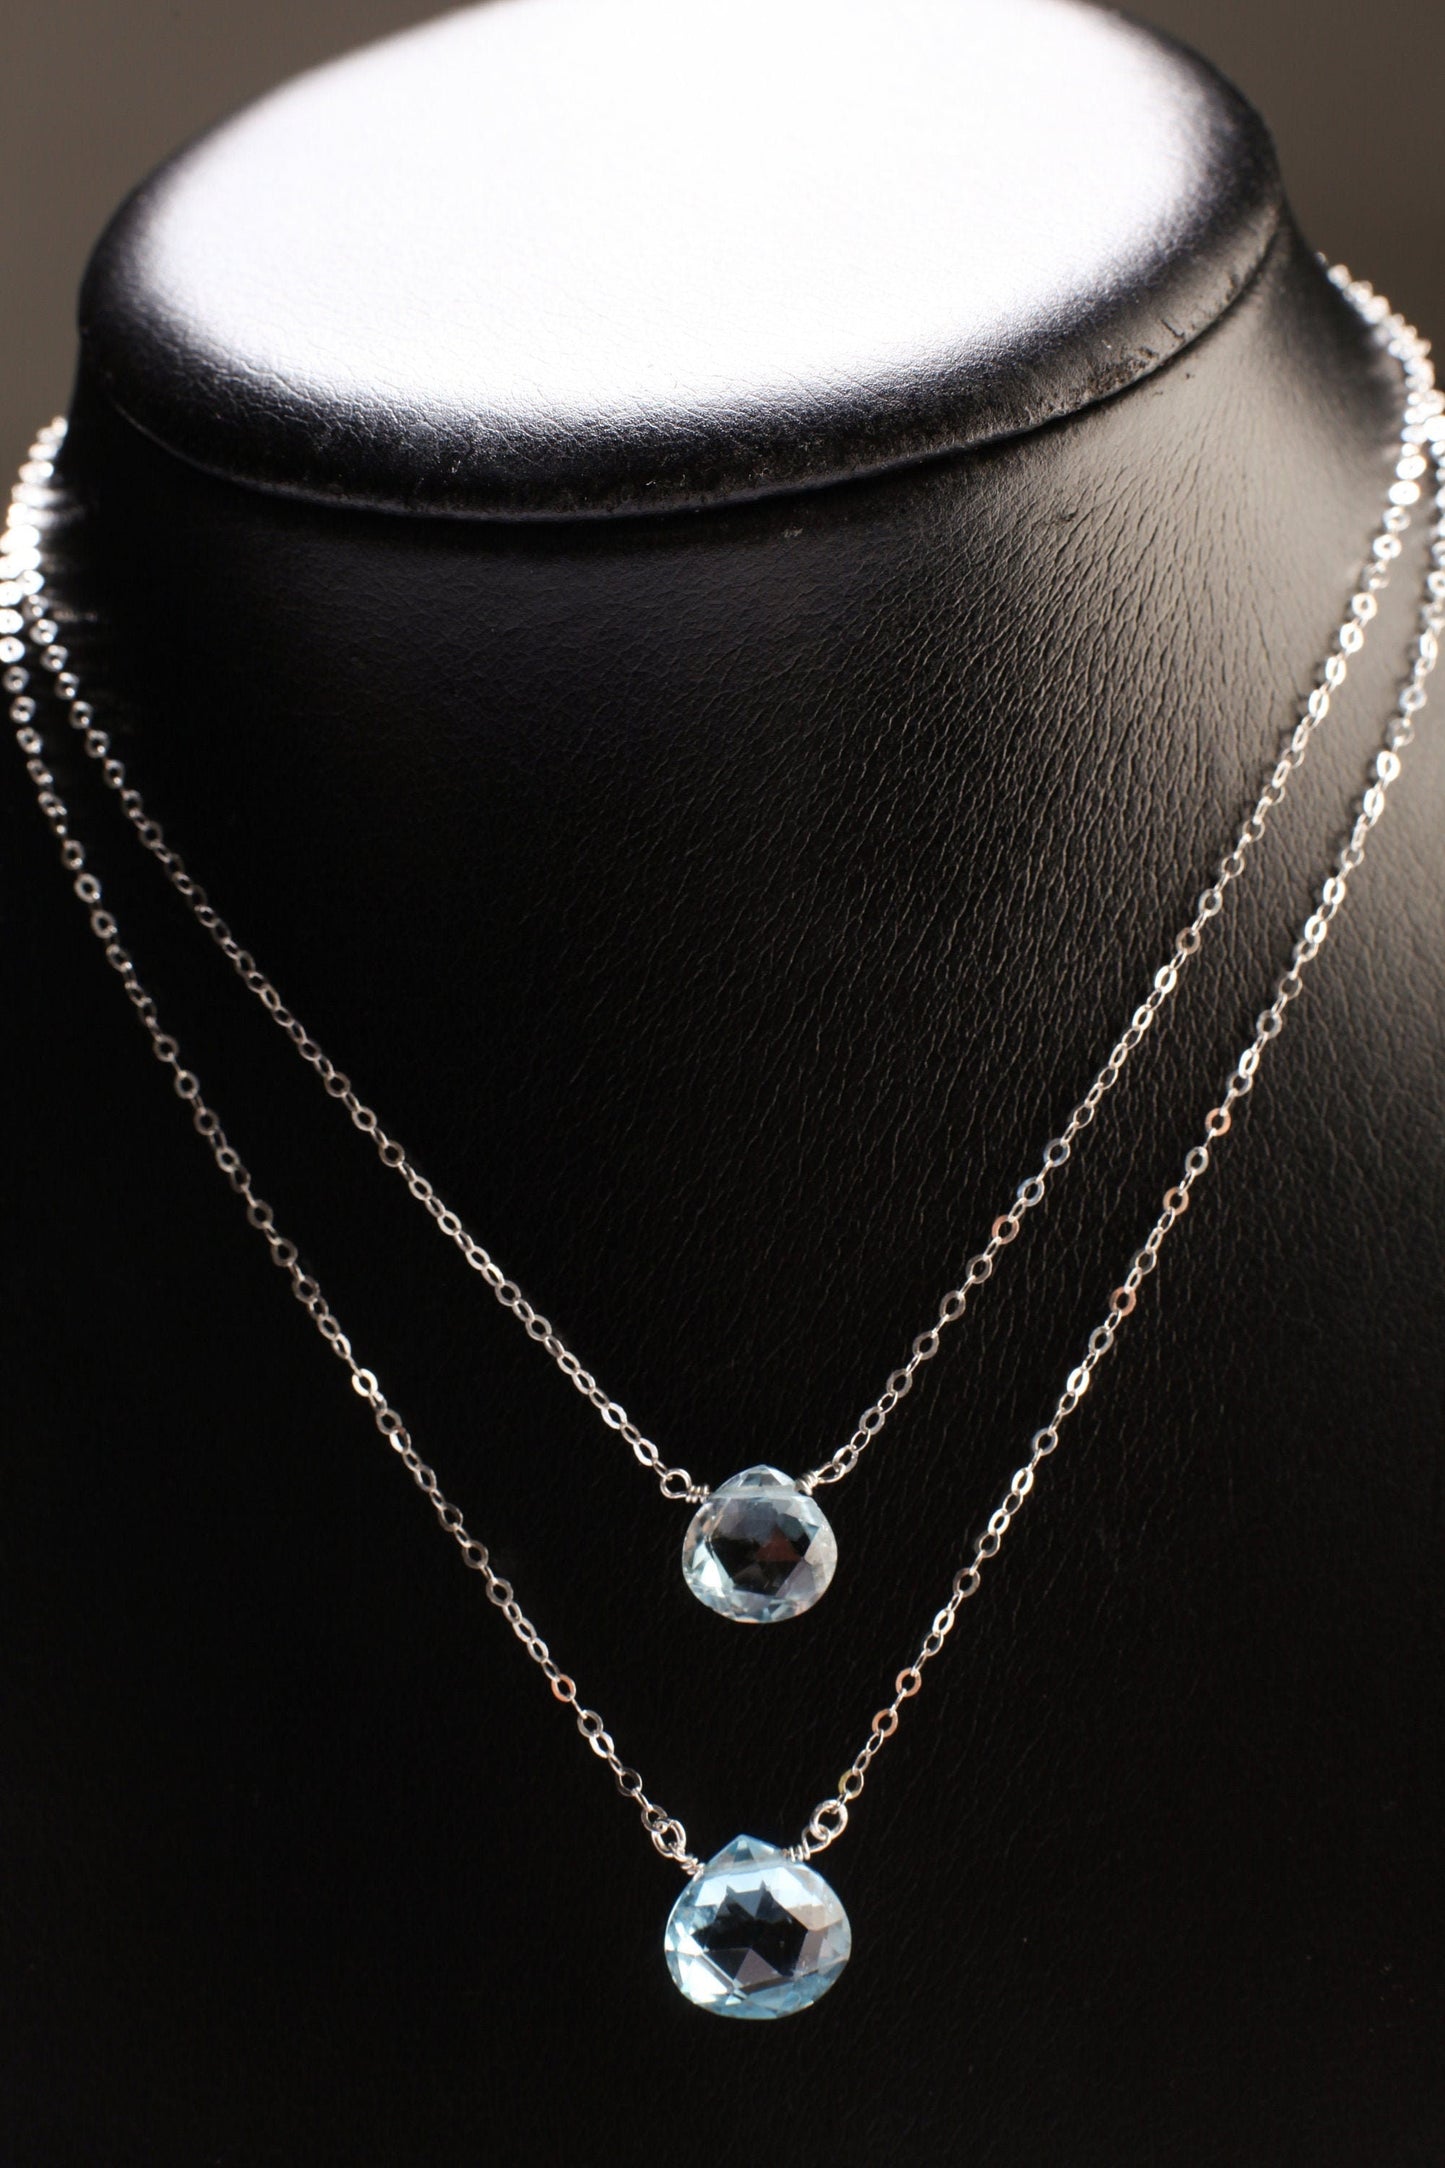 Swiss Blue Topaz Faceted Heart Briolette Teardrop AAA Quality 10.5mm and 12.5mm cut Gems in 925 Sterling Silver Necklace December birthstone